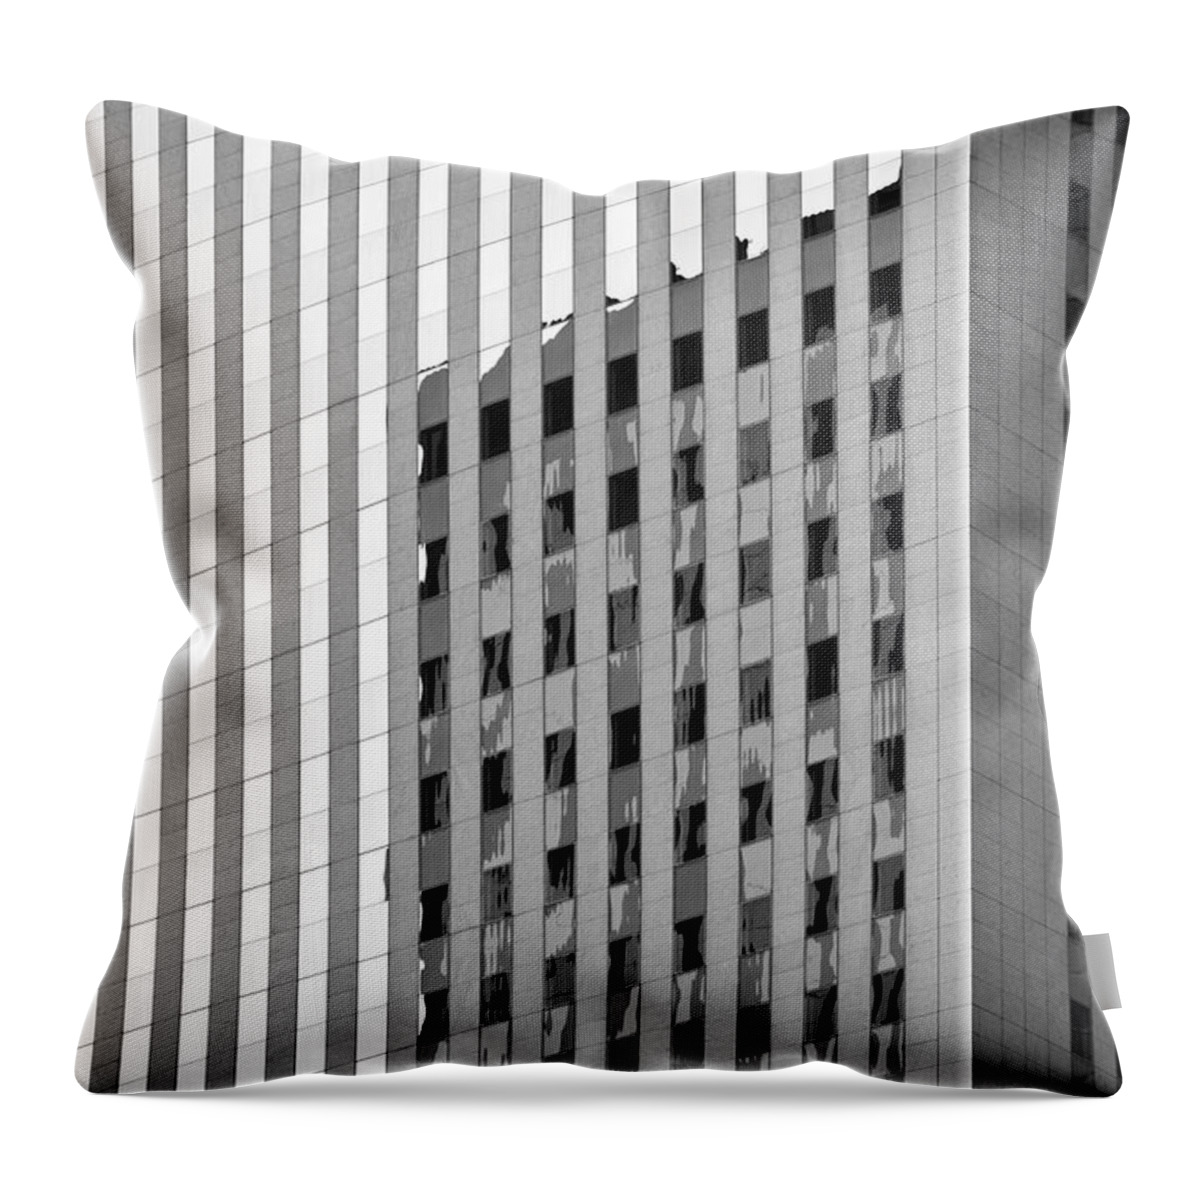 Structure Throw Pillow featuring the photograph Office Building #1 by Chevy Fleet